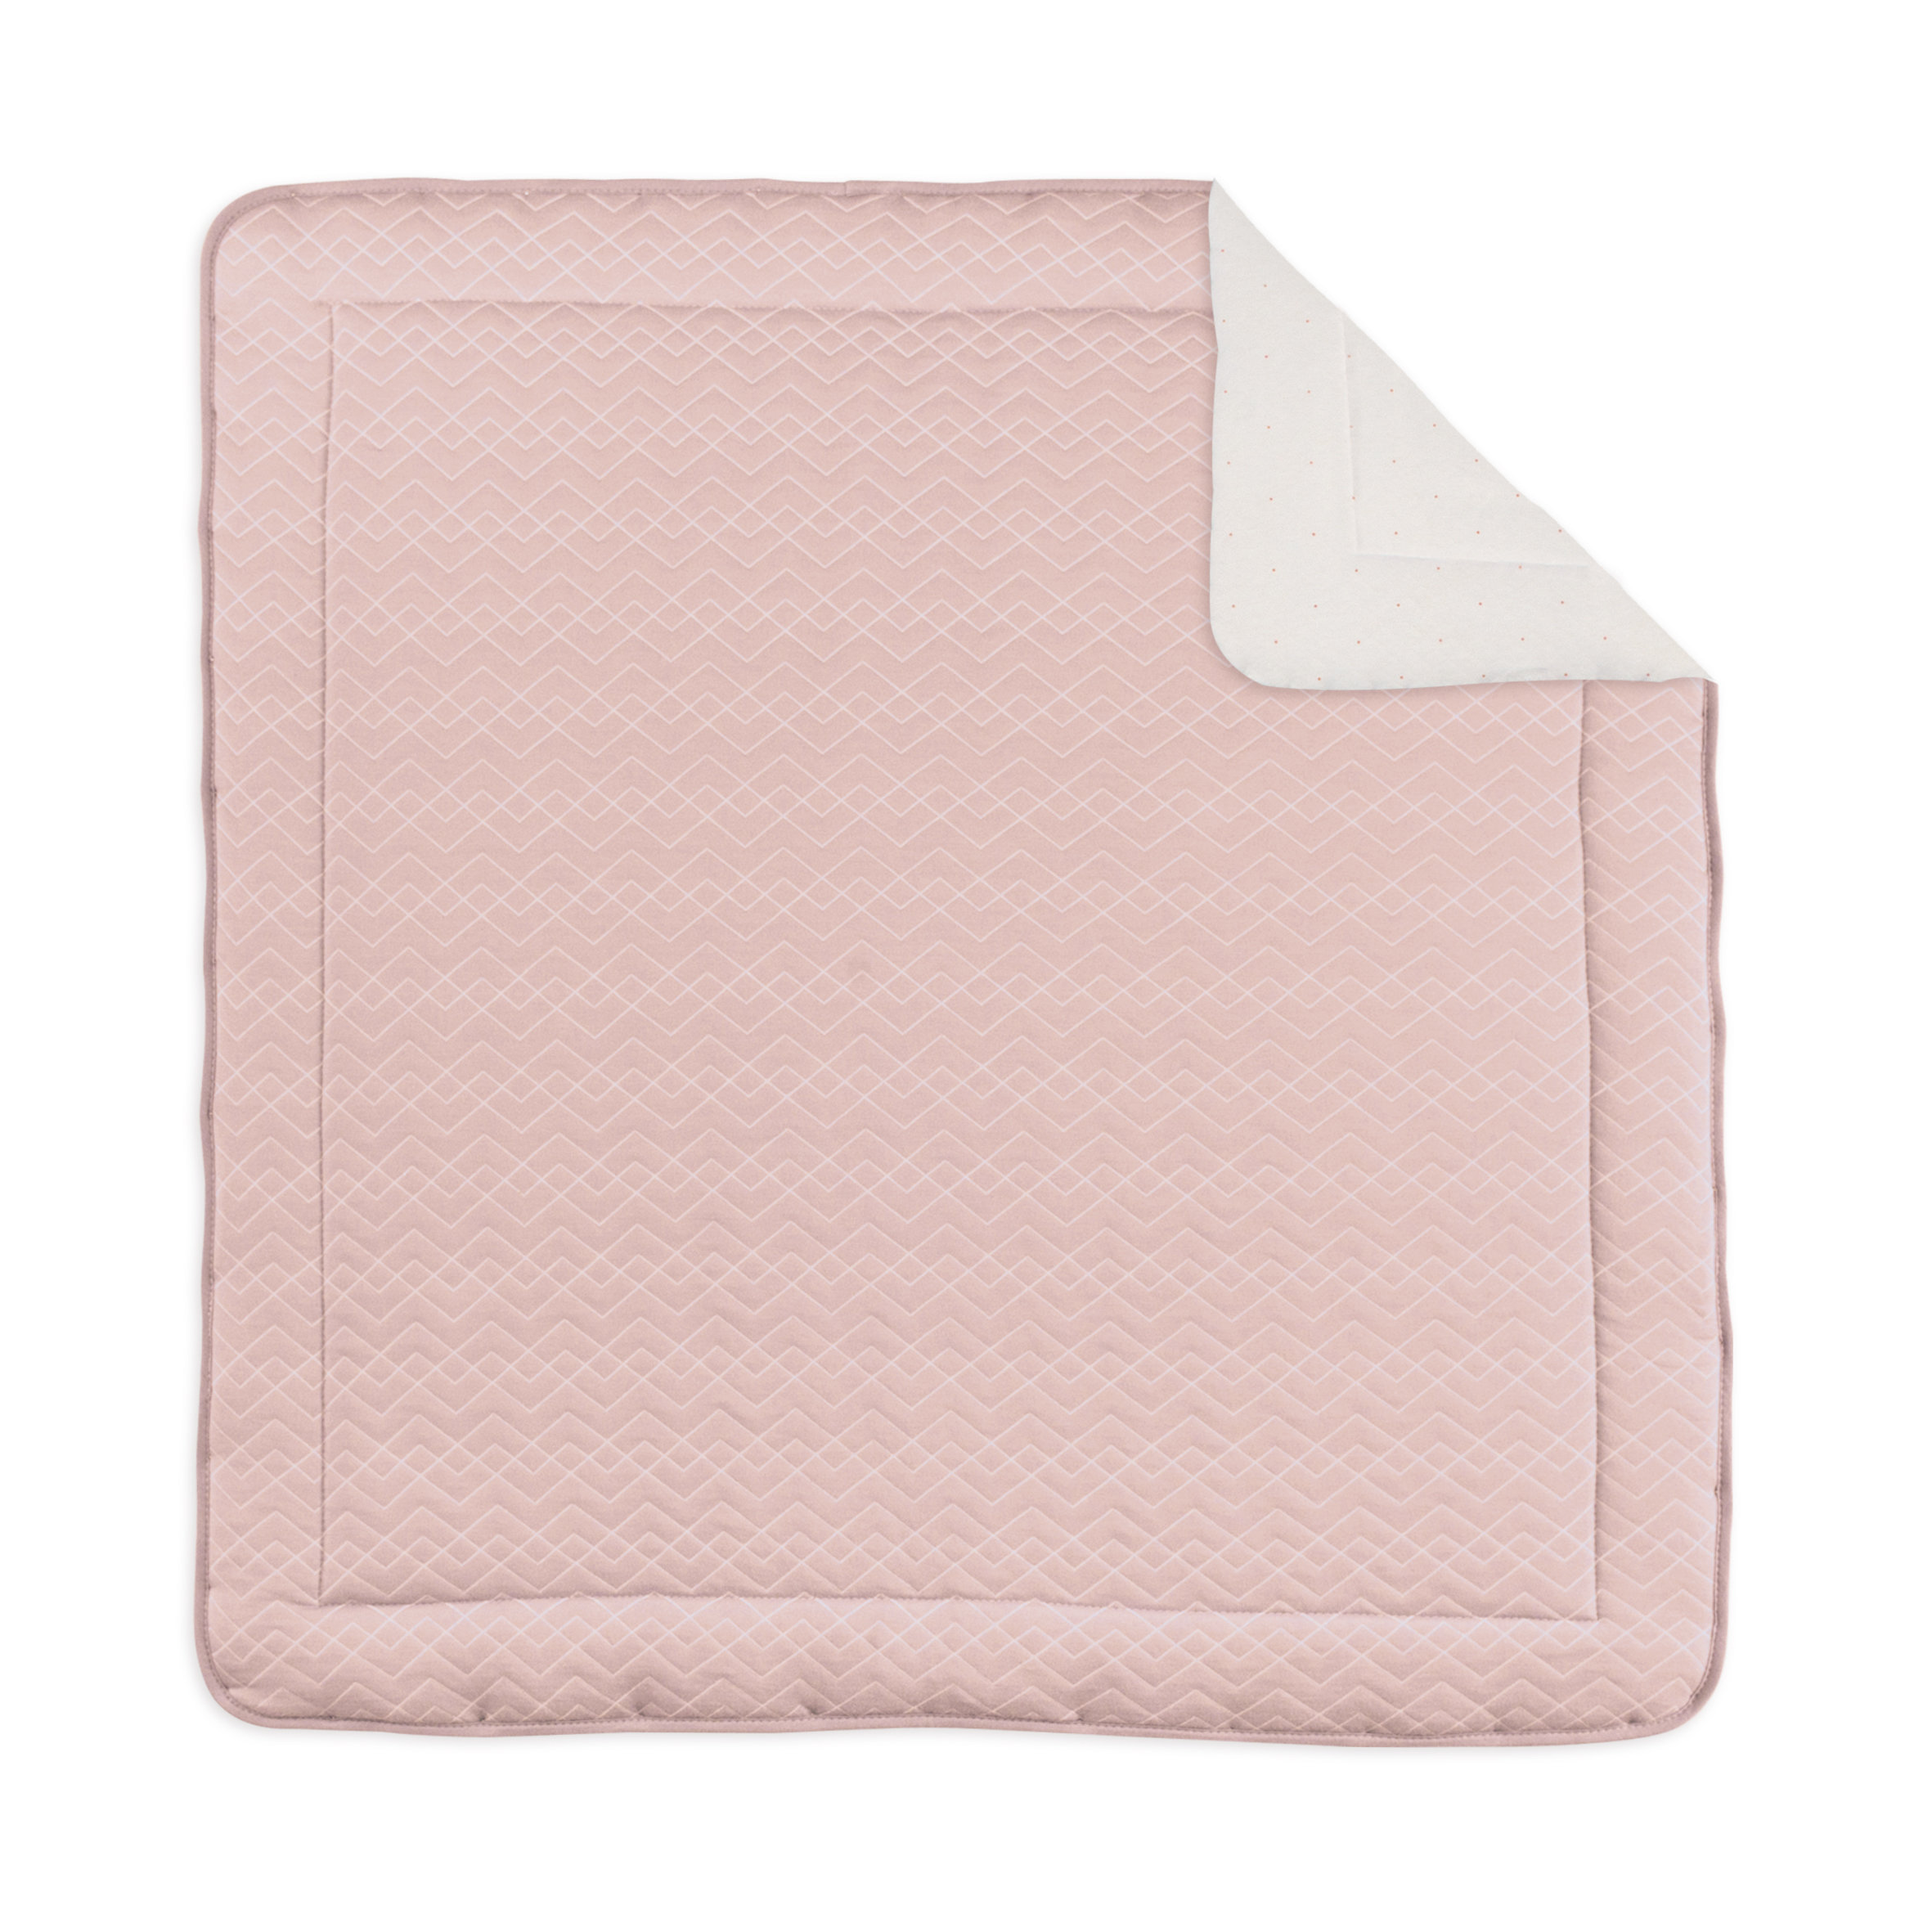 Alfombra de parque Pady quilted jersey + jersey 100x100cm OSAKA Rosa vieja